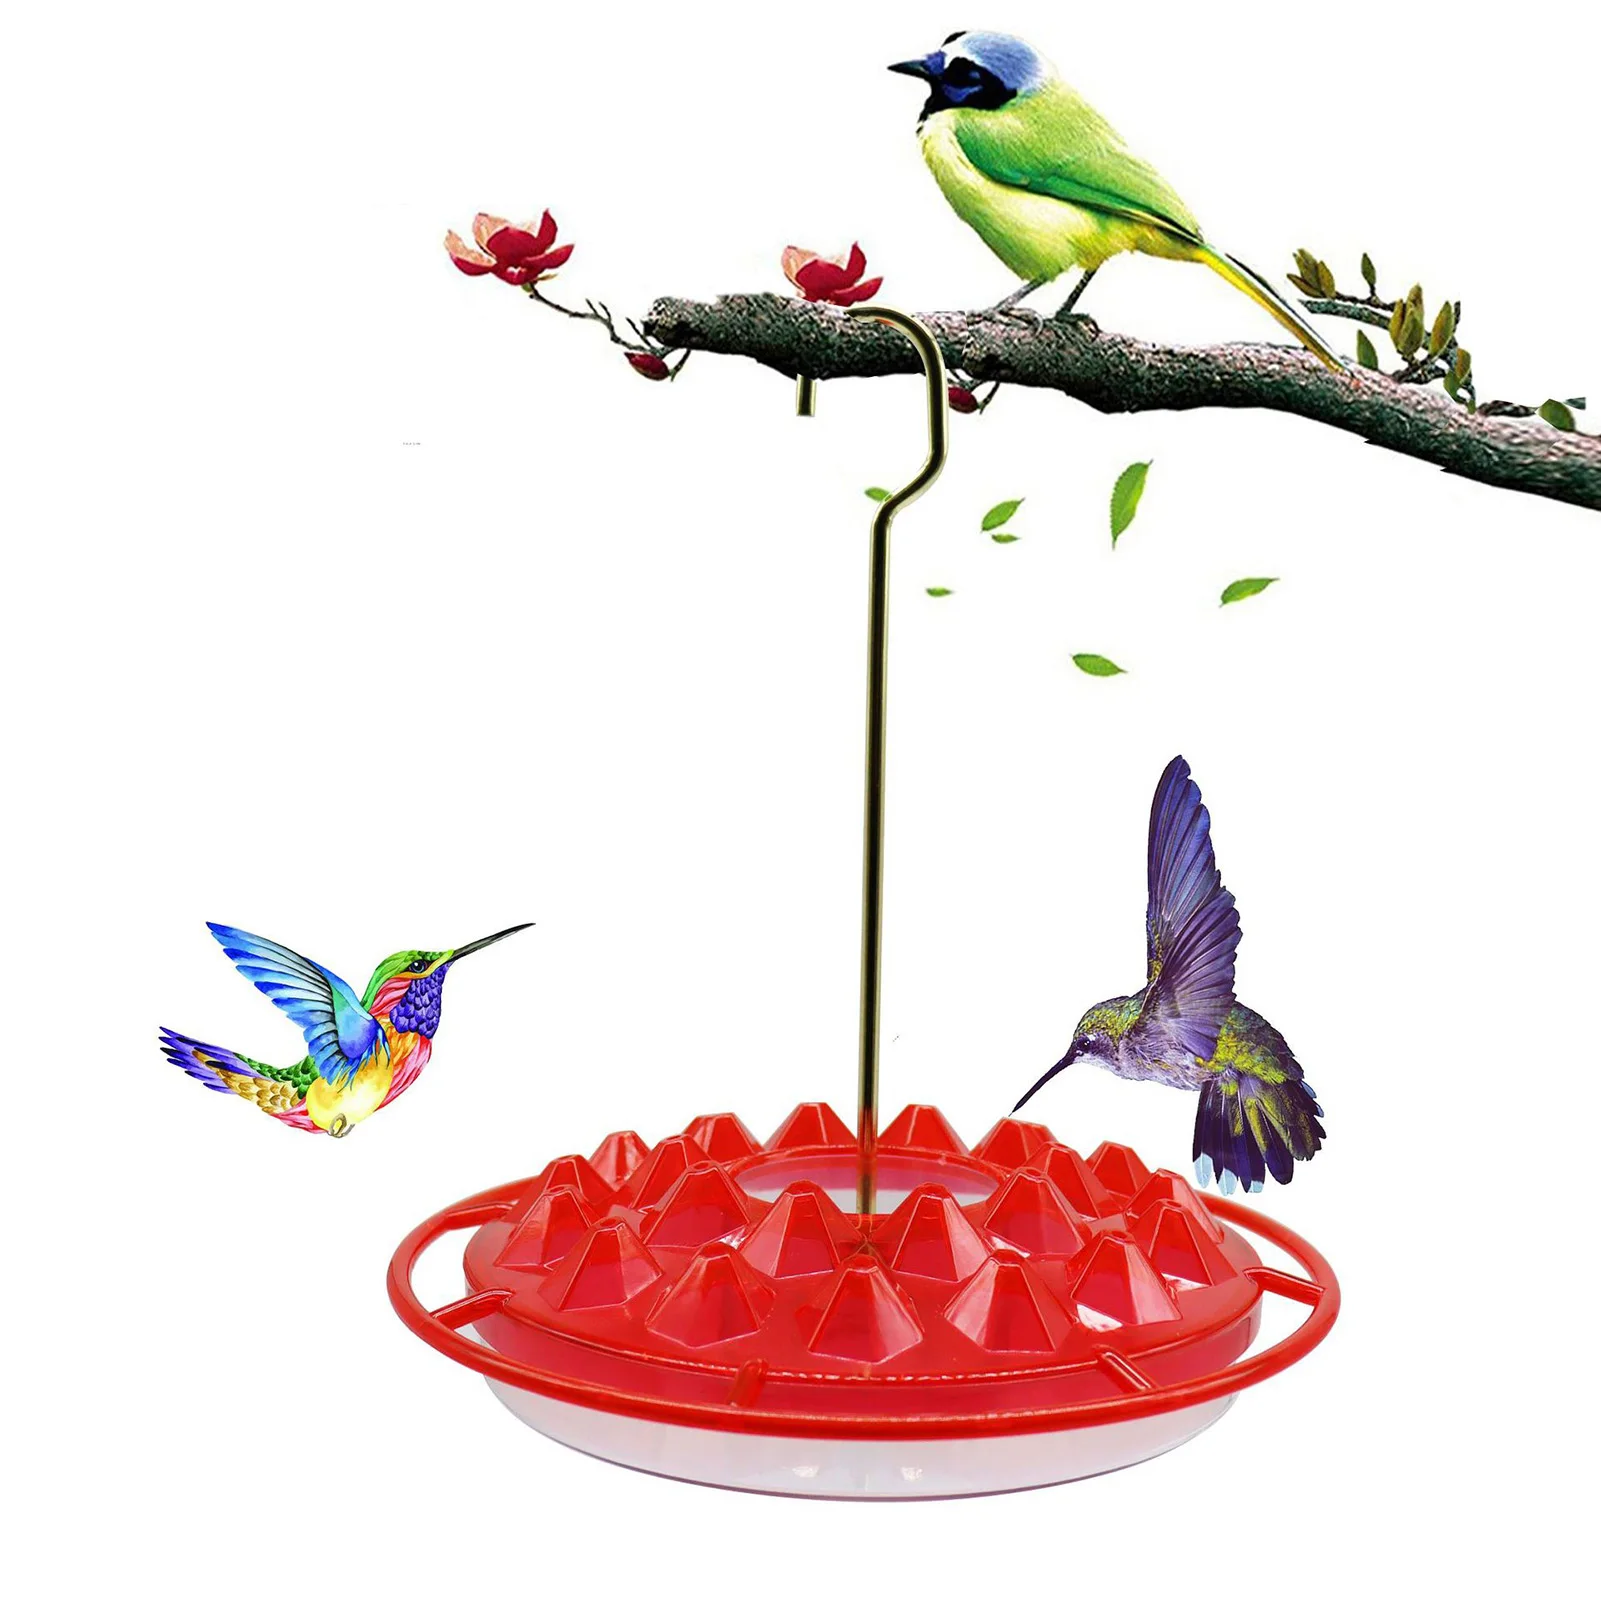 

New Marys Hummingbird Feeder with Perch and Built-In Ant Moat Outdoor Bird Feeder Pet Bird Supplies Drop Shipping